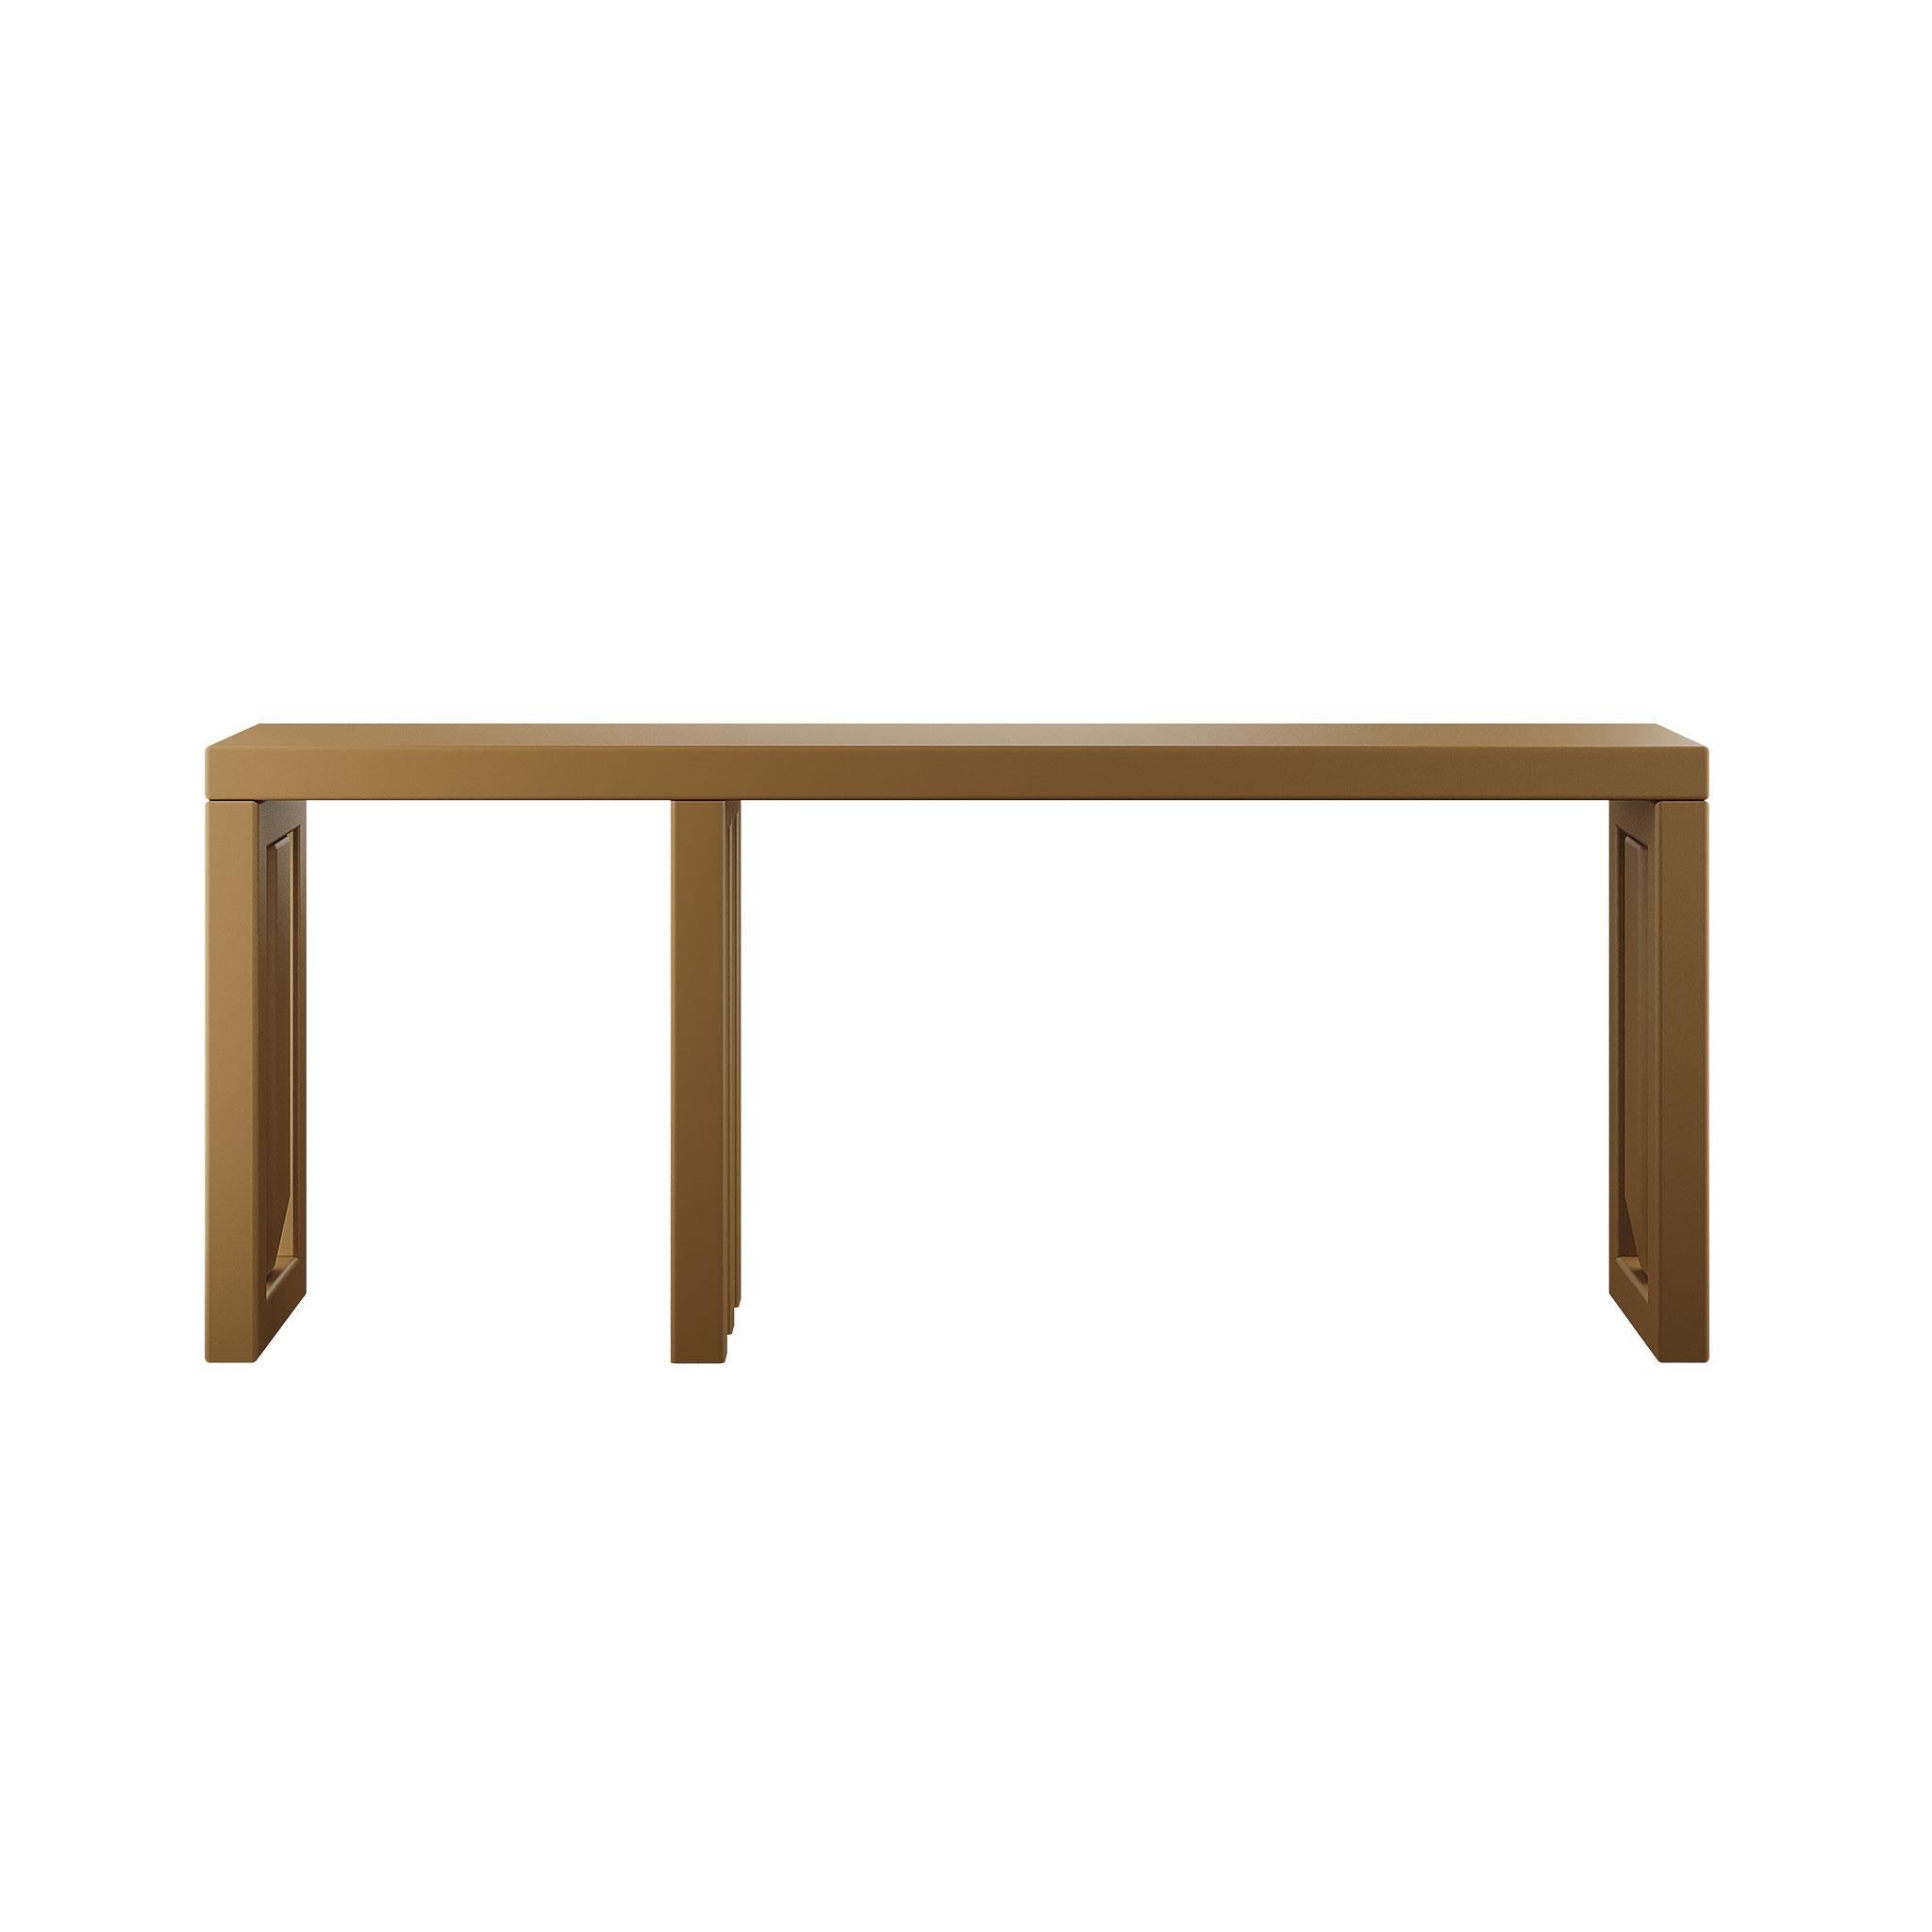 European Minimalist Modern Console Table Three Legs Wood Light Brown Matte Lacquer For Sale